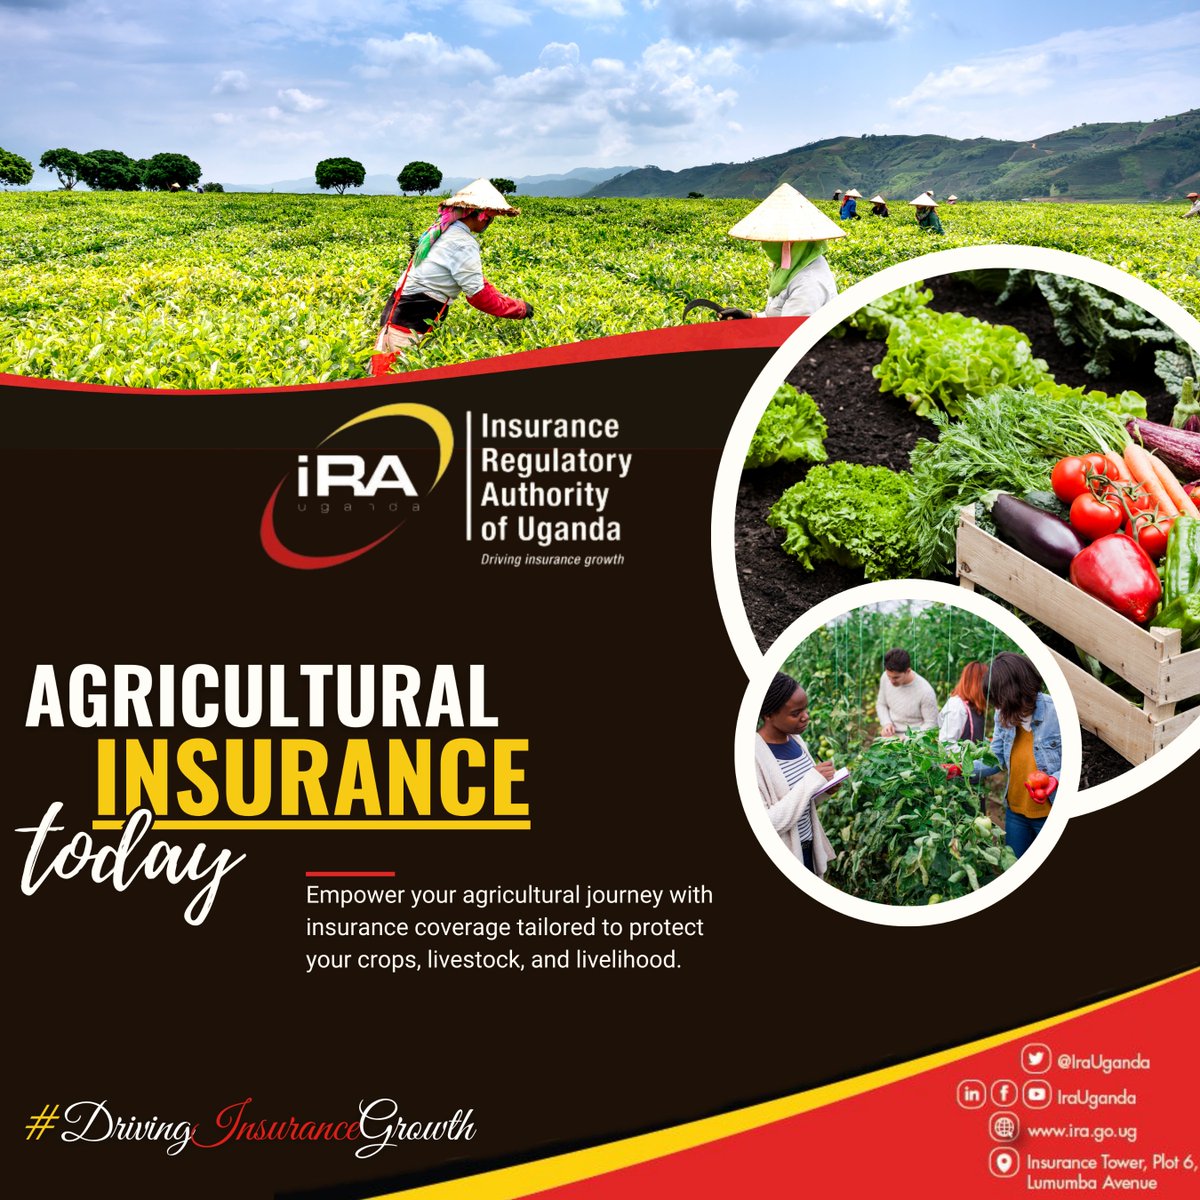 Secure your agricultural future today with tailored insurance coverage safeguarding crops, livestock, and livelihoods. Protect against uncertainties, ensuring resilience and prosperity in farming.
 
#BeInsured #DrivingInsuranceGrowth
#AgricultureInsurance #CropProtection